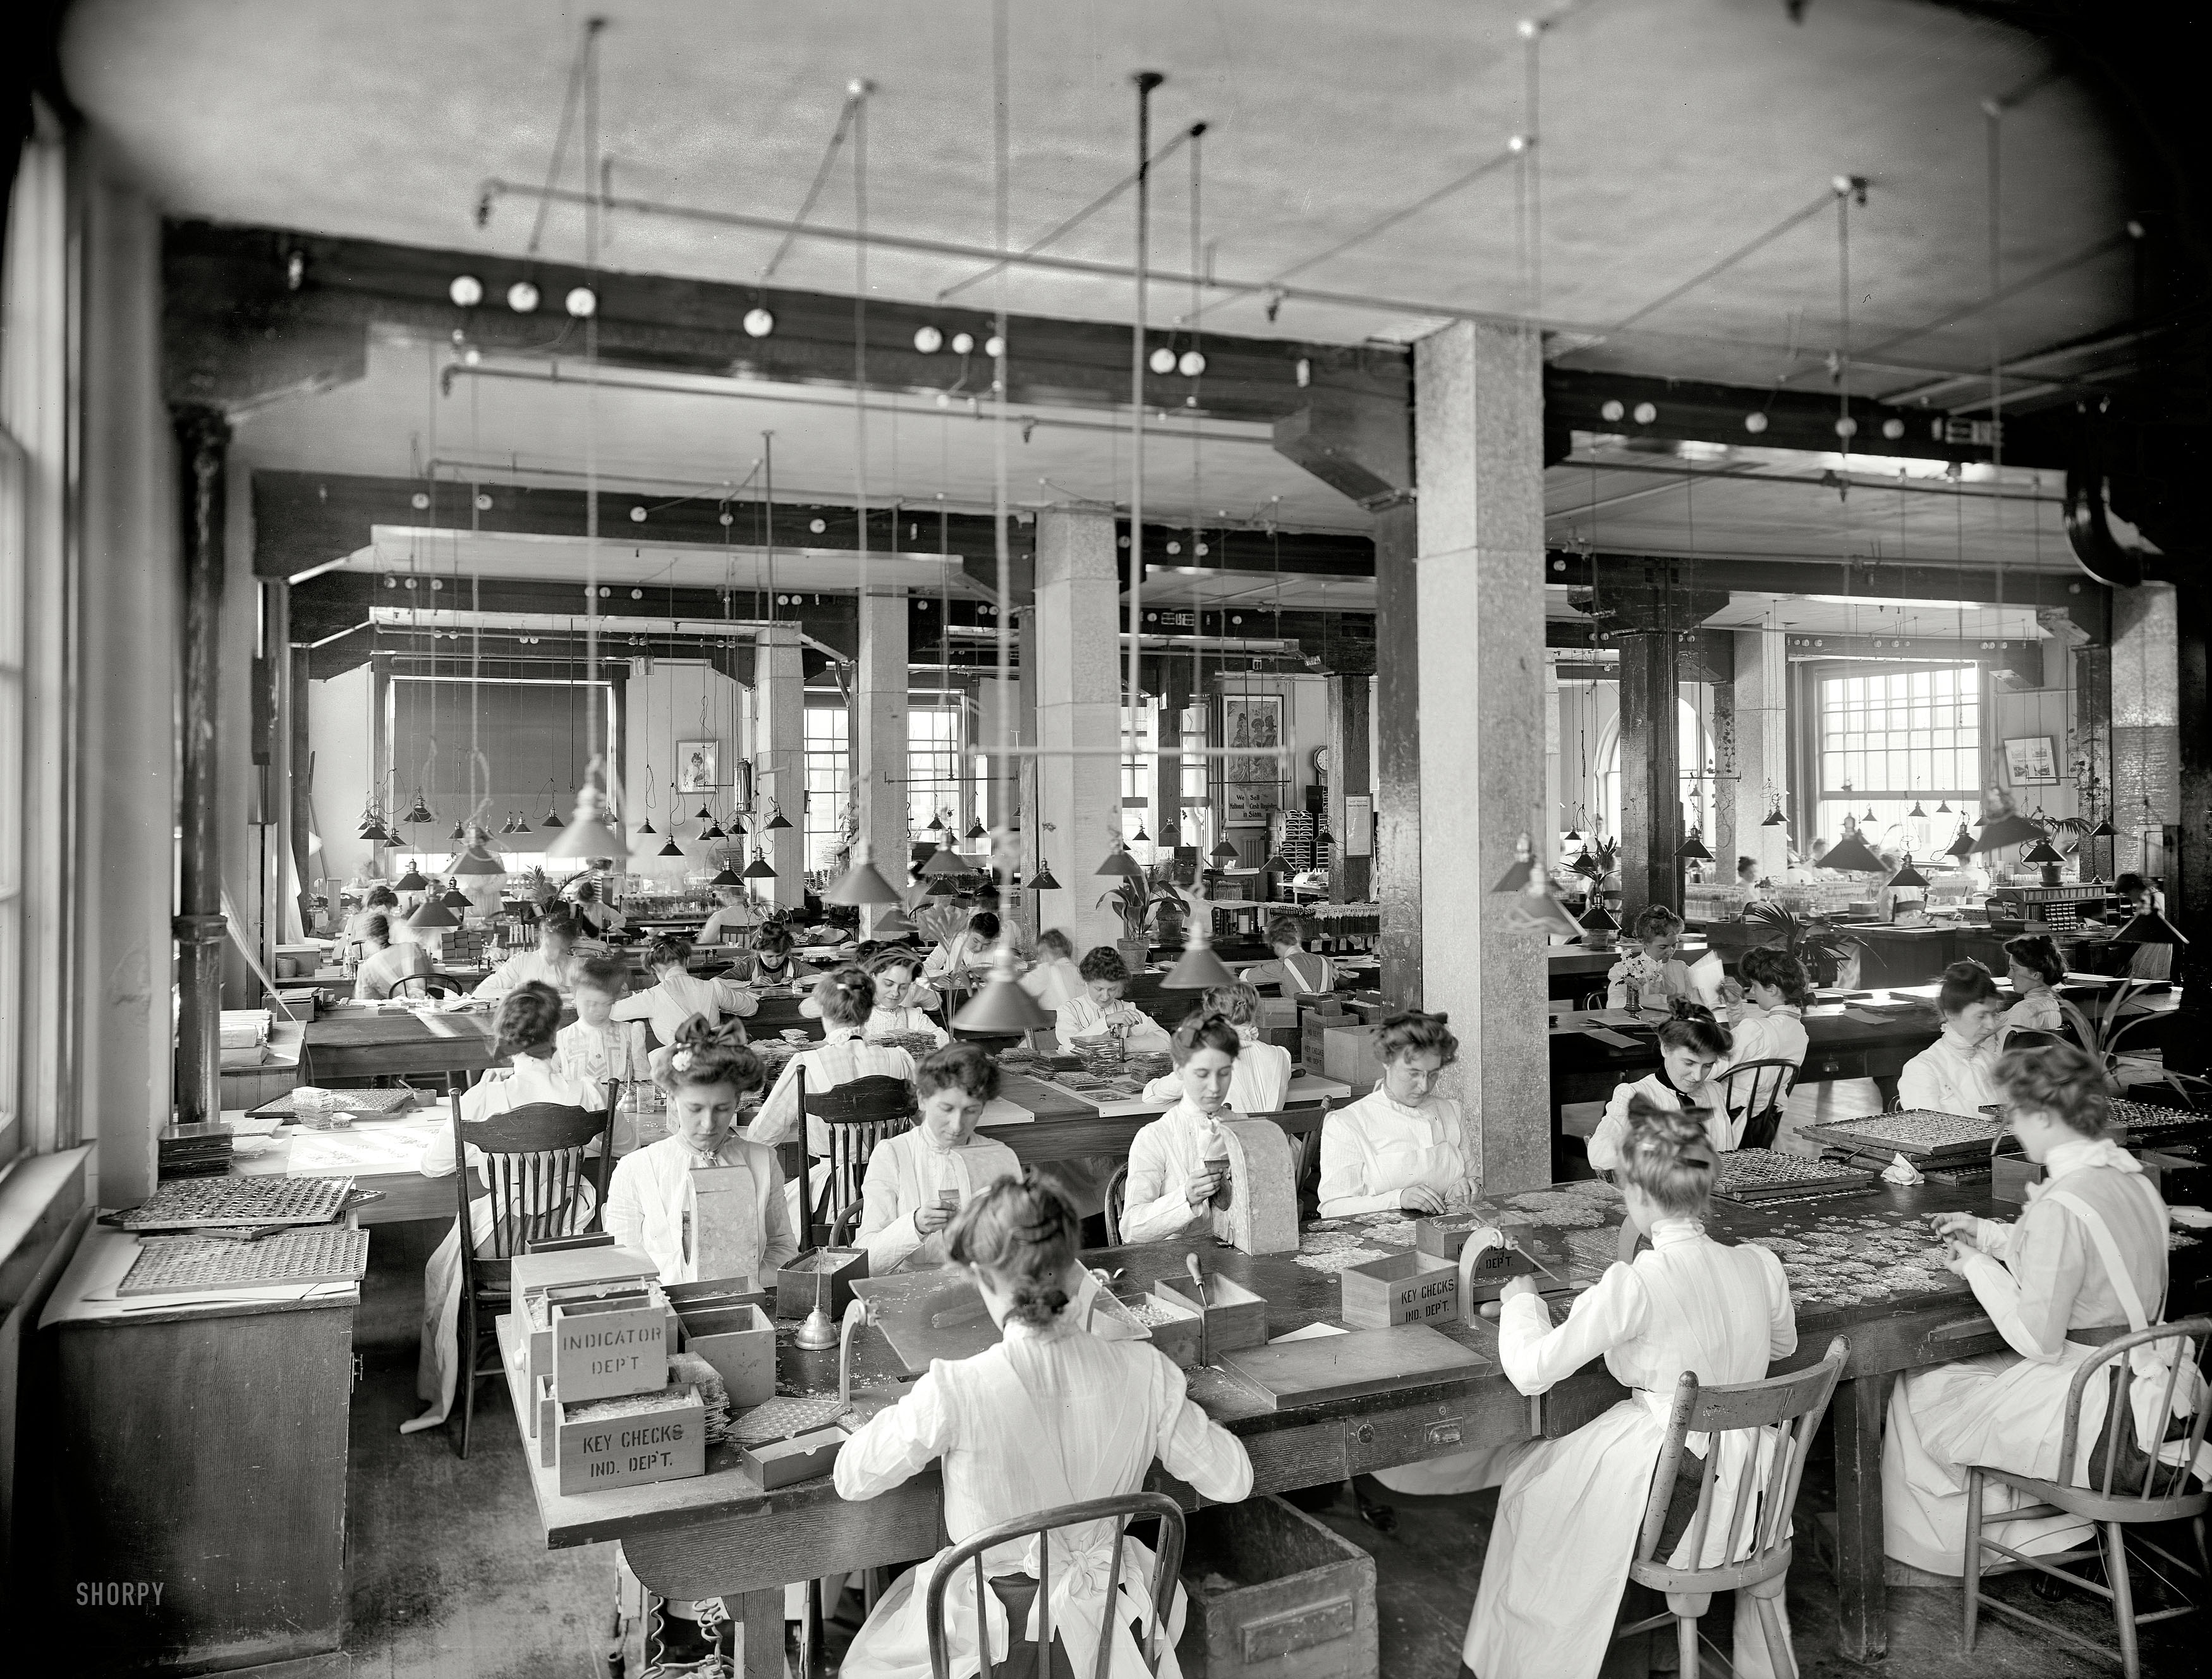 Dayton, Ohio, circa 1902. "Indicator department, National Cash Register Co." Our second glimpse this month at the inner workings of National Cash Register. 8x10 glass negative by William Henry Jackson, Detroit Publishing. View full size.